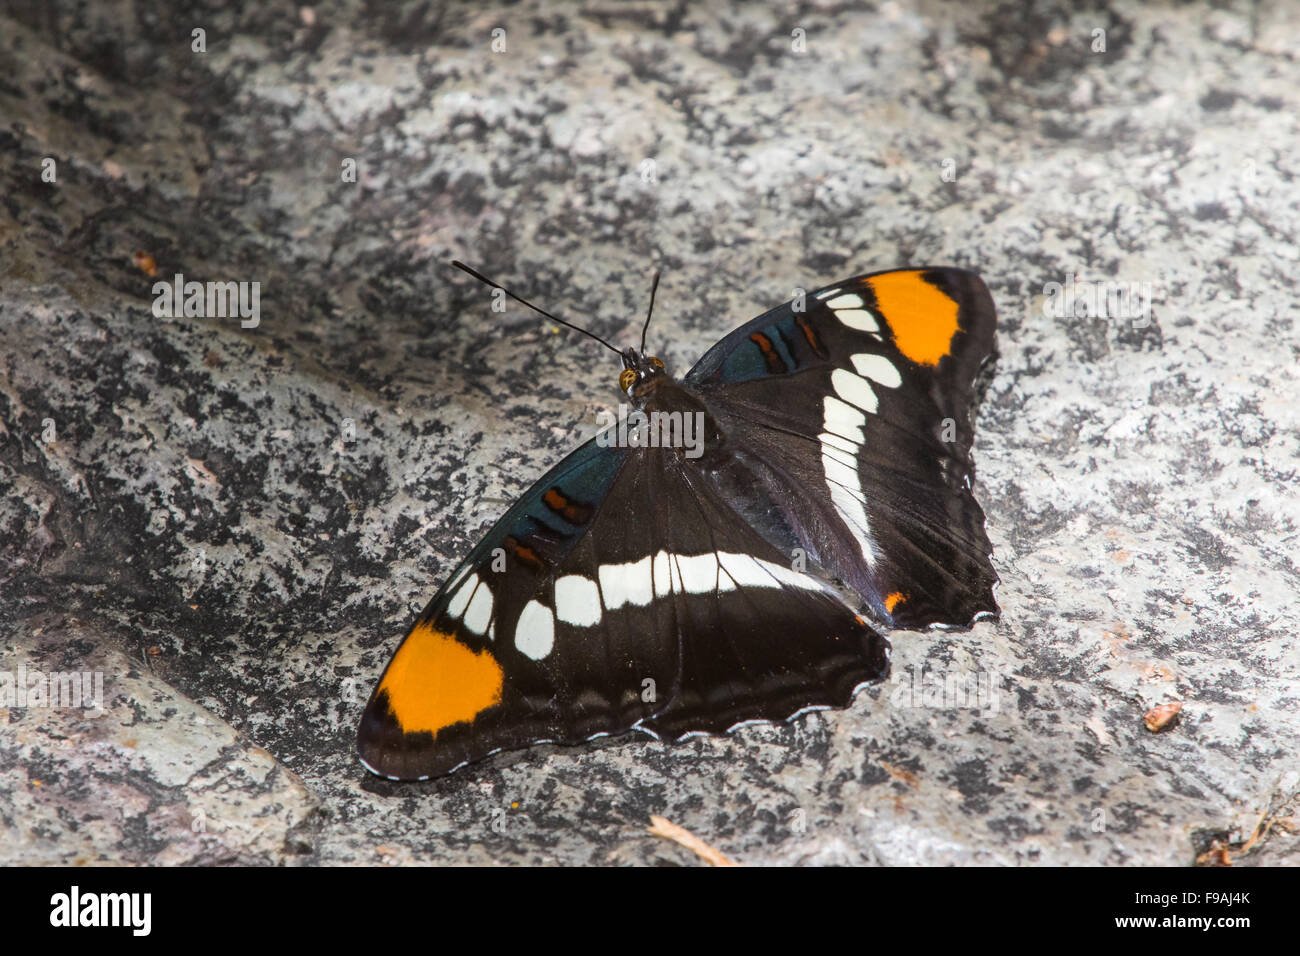 An Arizona Sister butterfly, Adelpha eulalia, basking on a rock in Big Bend National Park Stock Photo